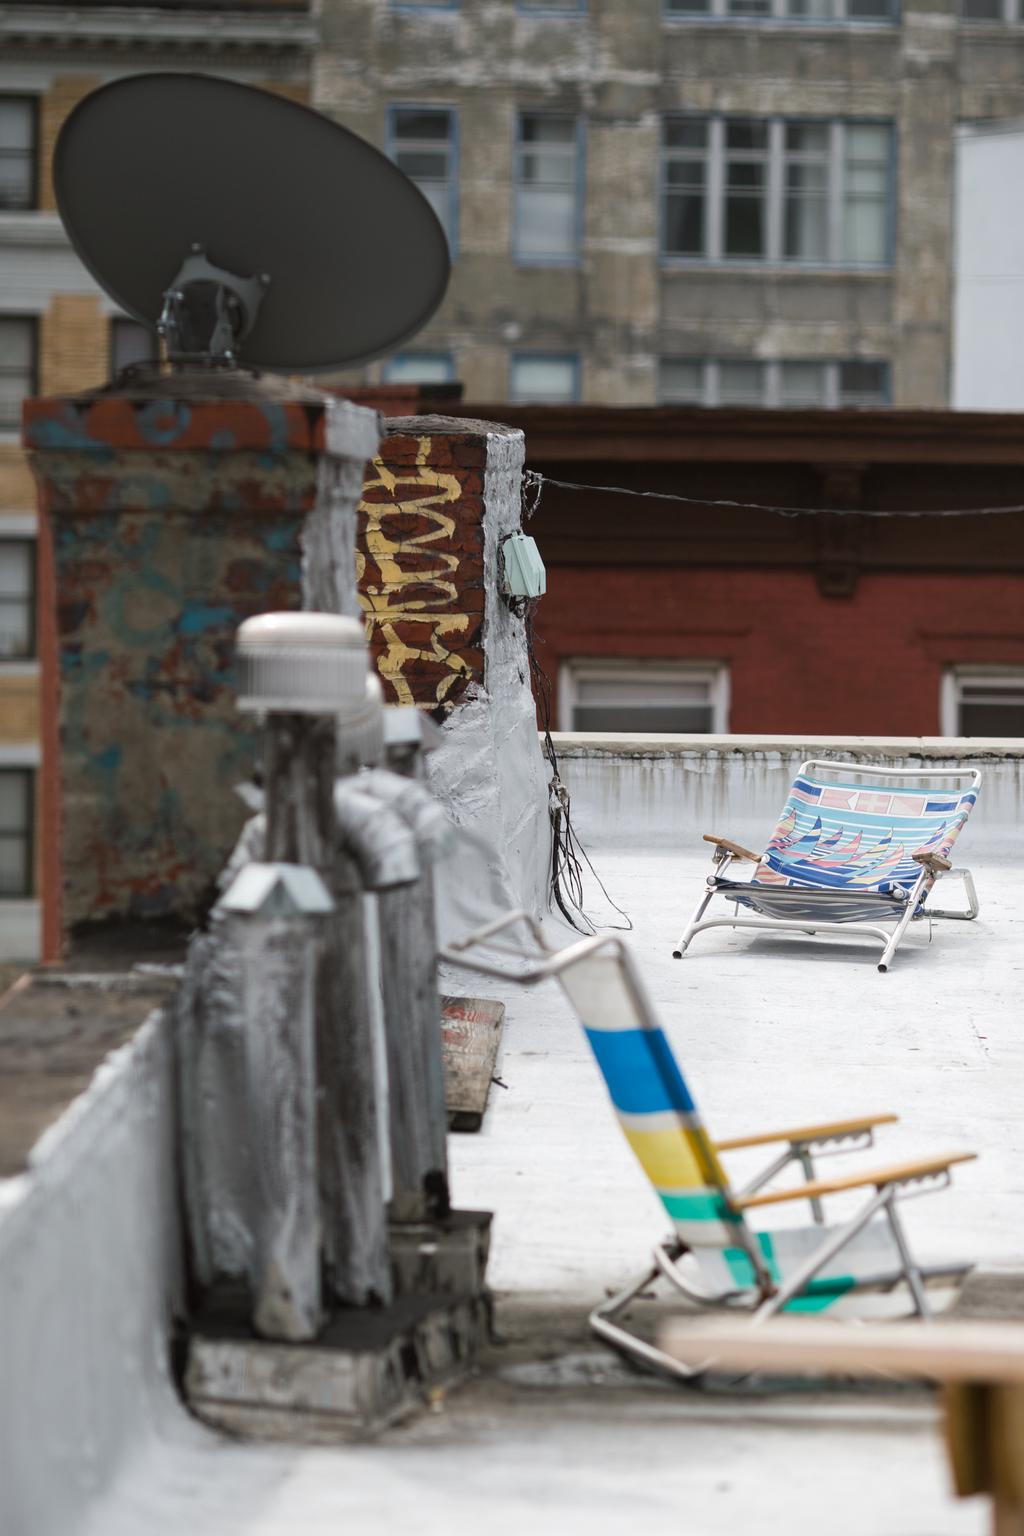 Unused sun loungers on a rooftop. It is a grey day.